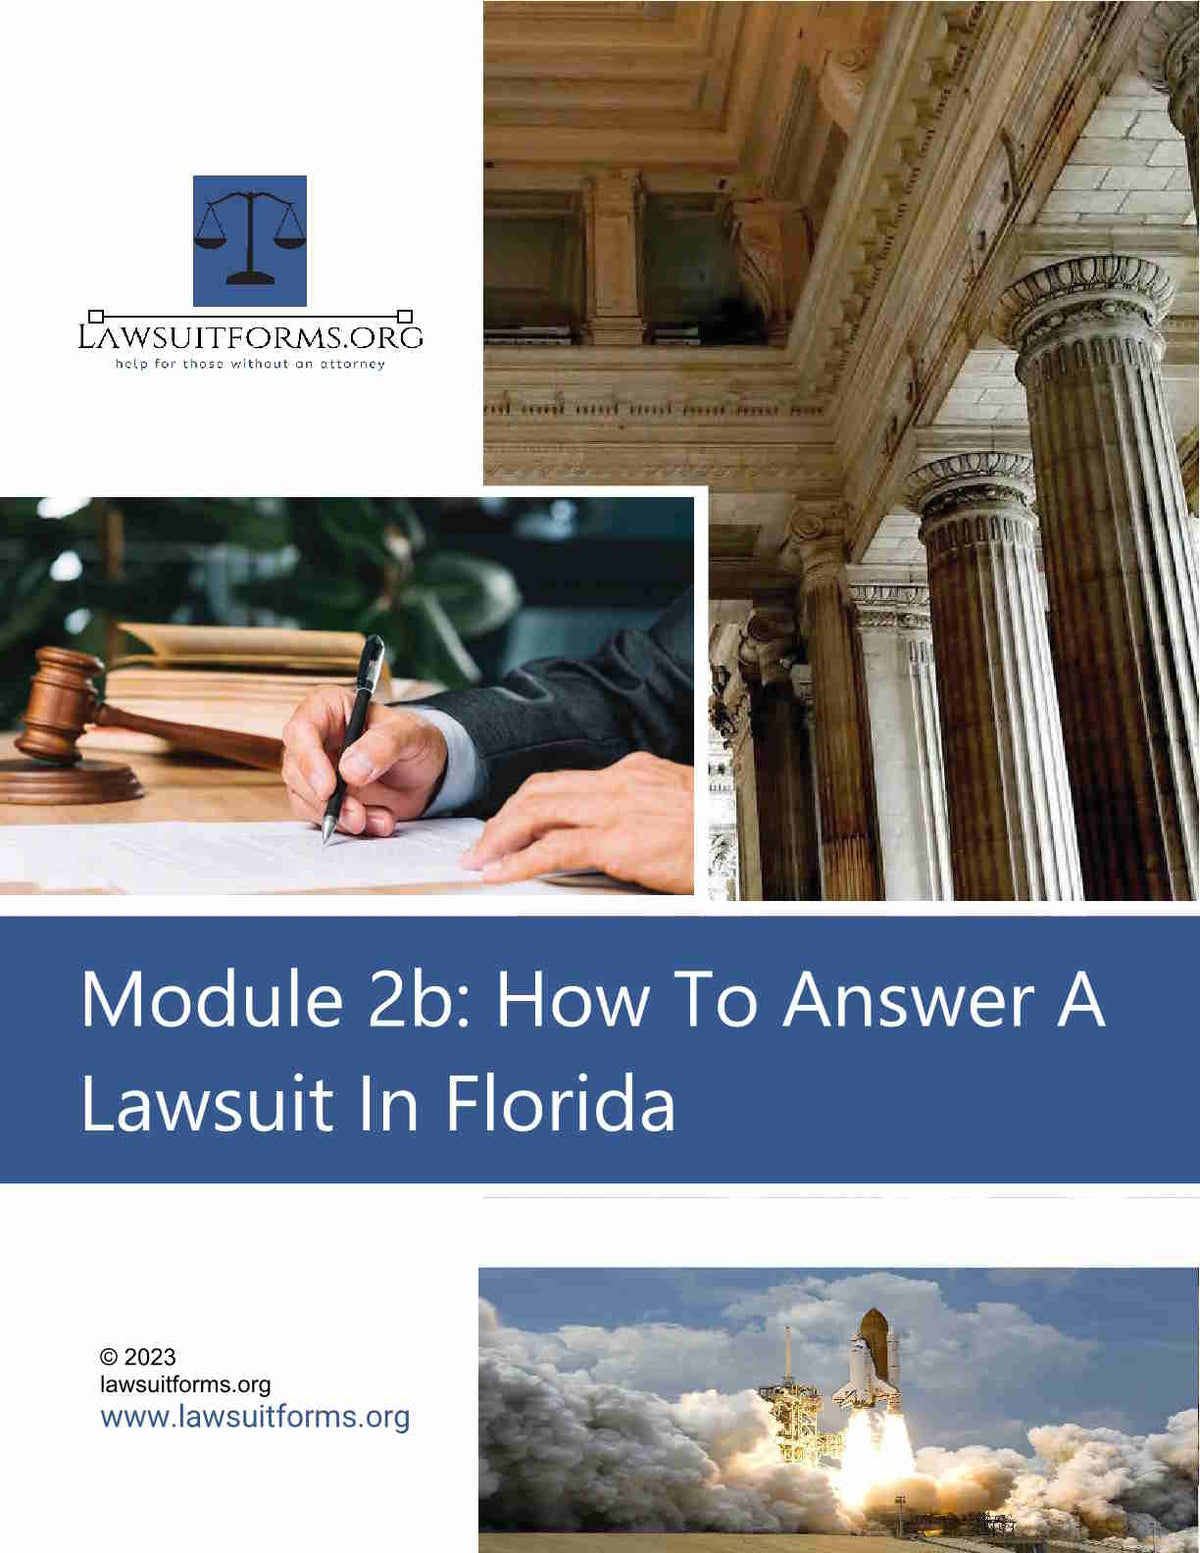 How to answer a lawsuit in Florida